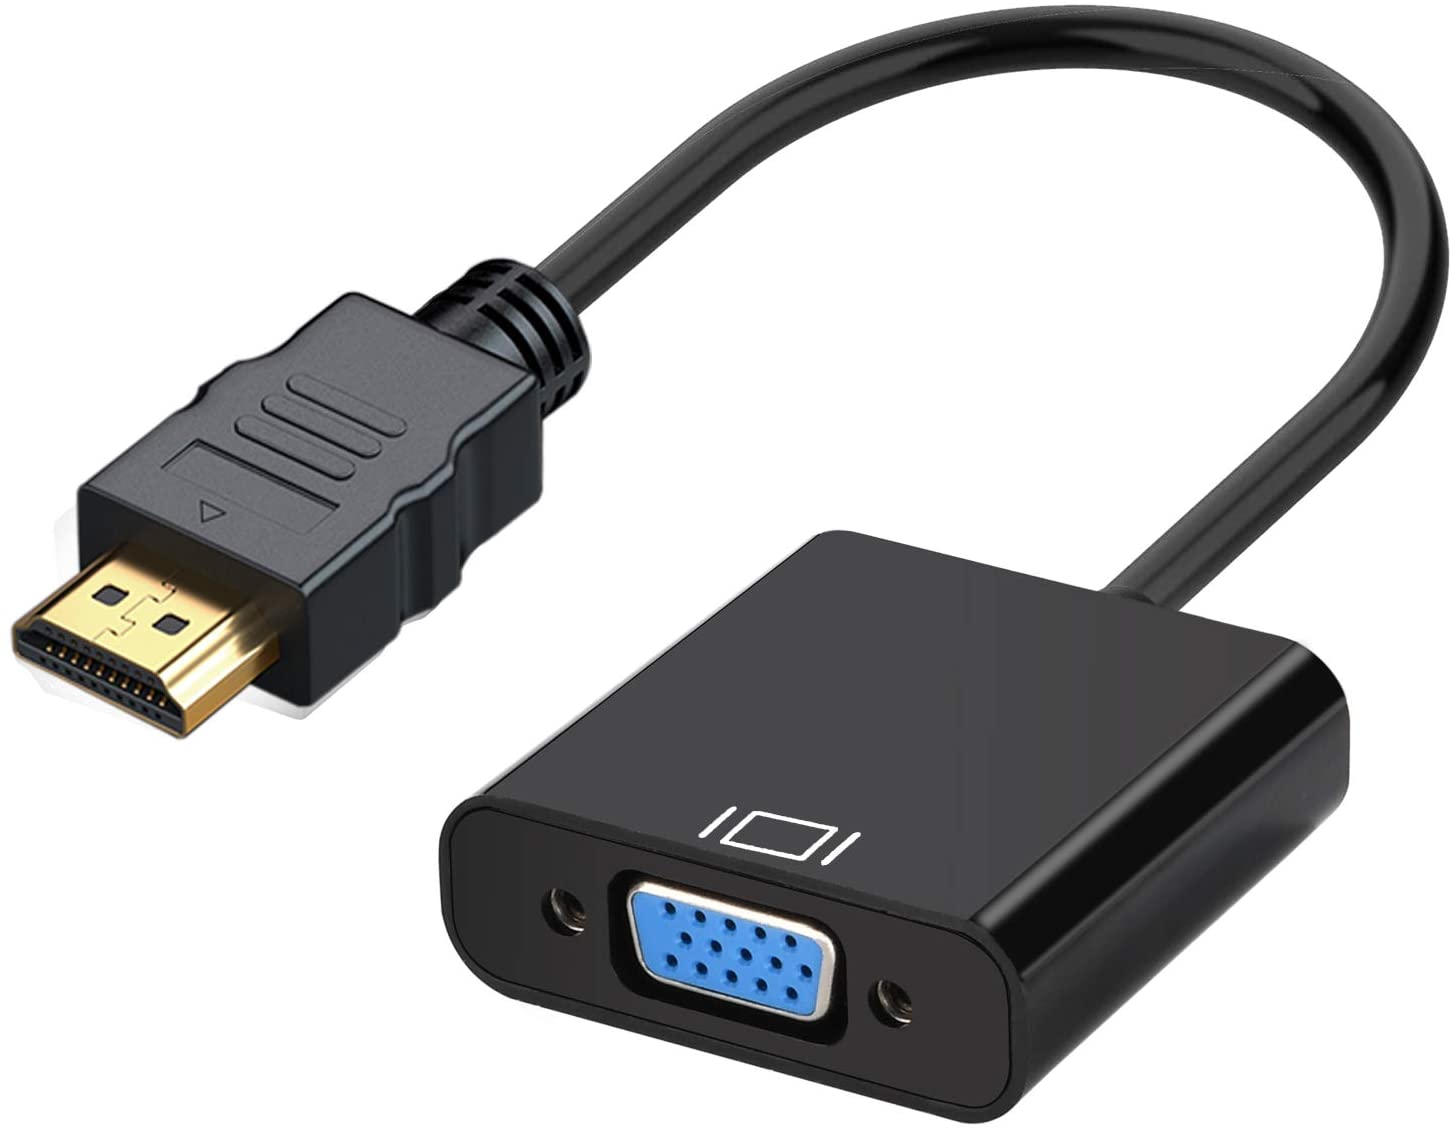 Rybozen HDMI to VGA, Gold-Plated HDMI to VGA Adapter (Male to Female) Support Computer, Desktop, Laptop, PC, Monitor, Projector, HDTV, Chromebook, Raspberry Pi, Roku, Xbox and More